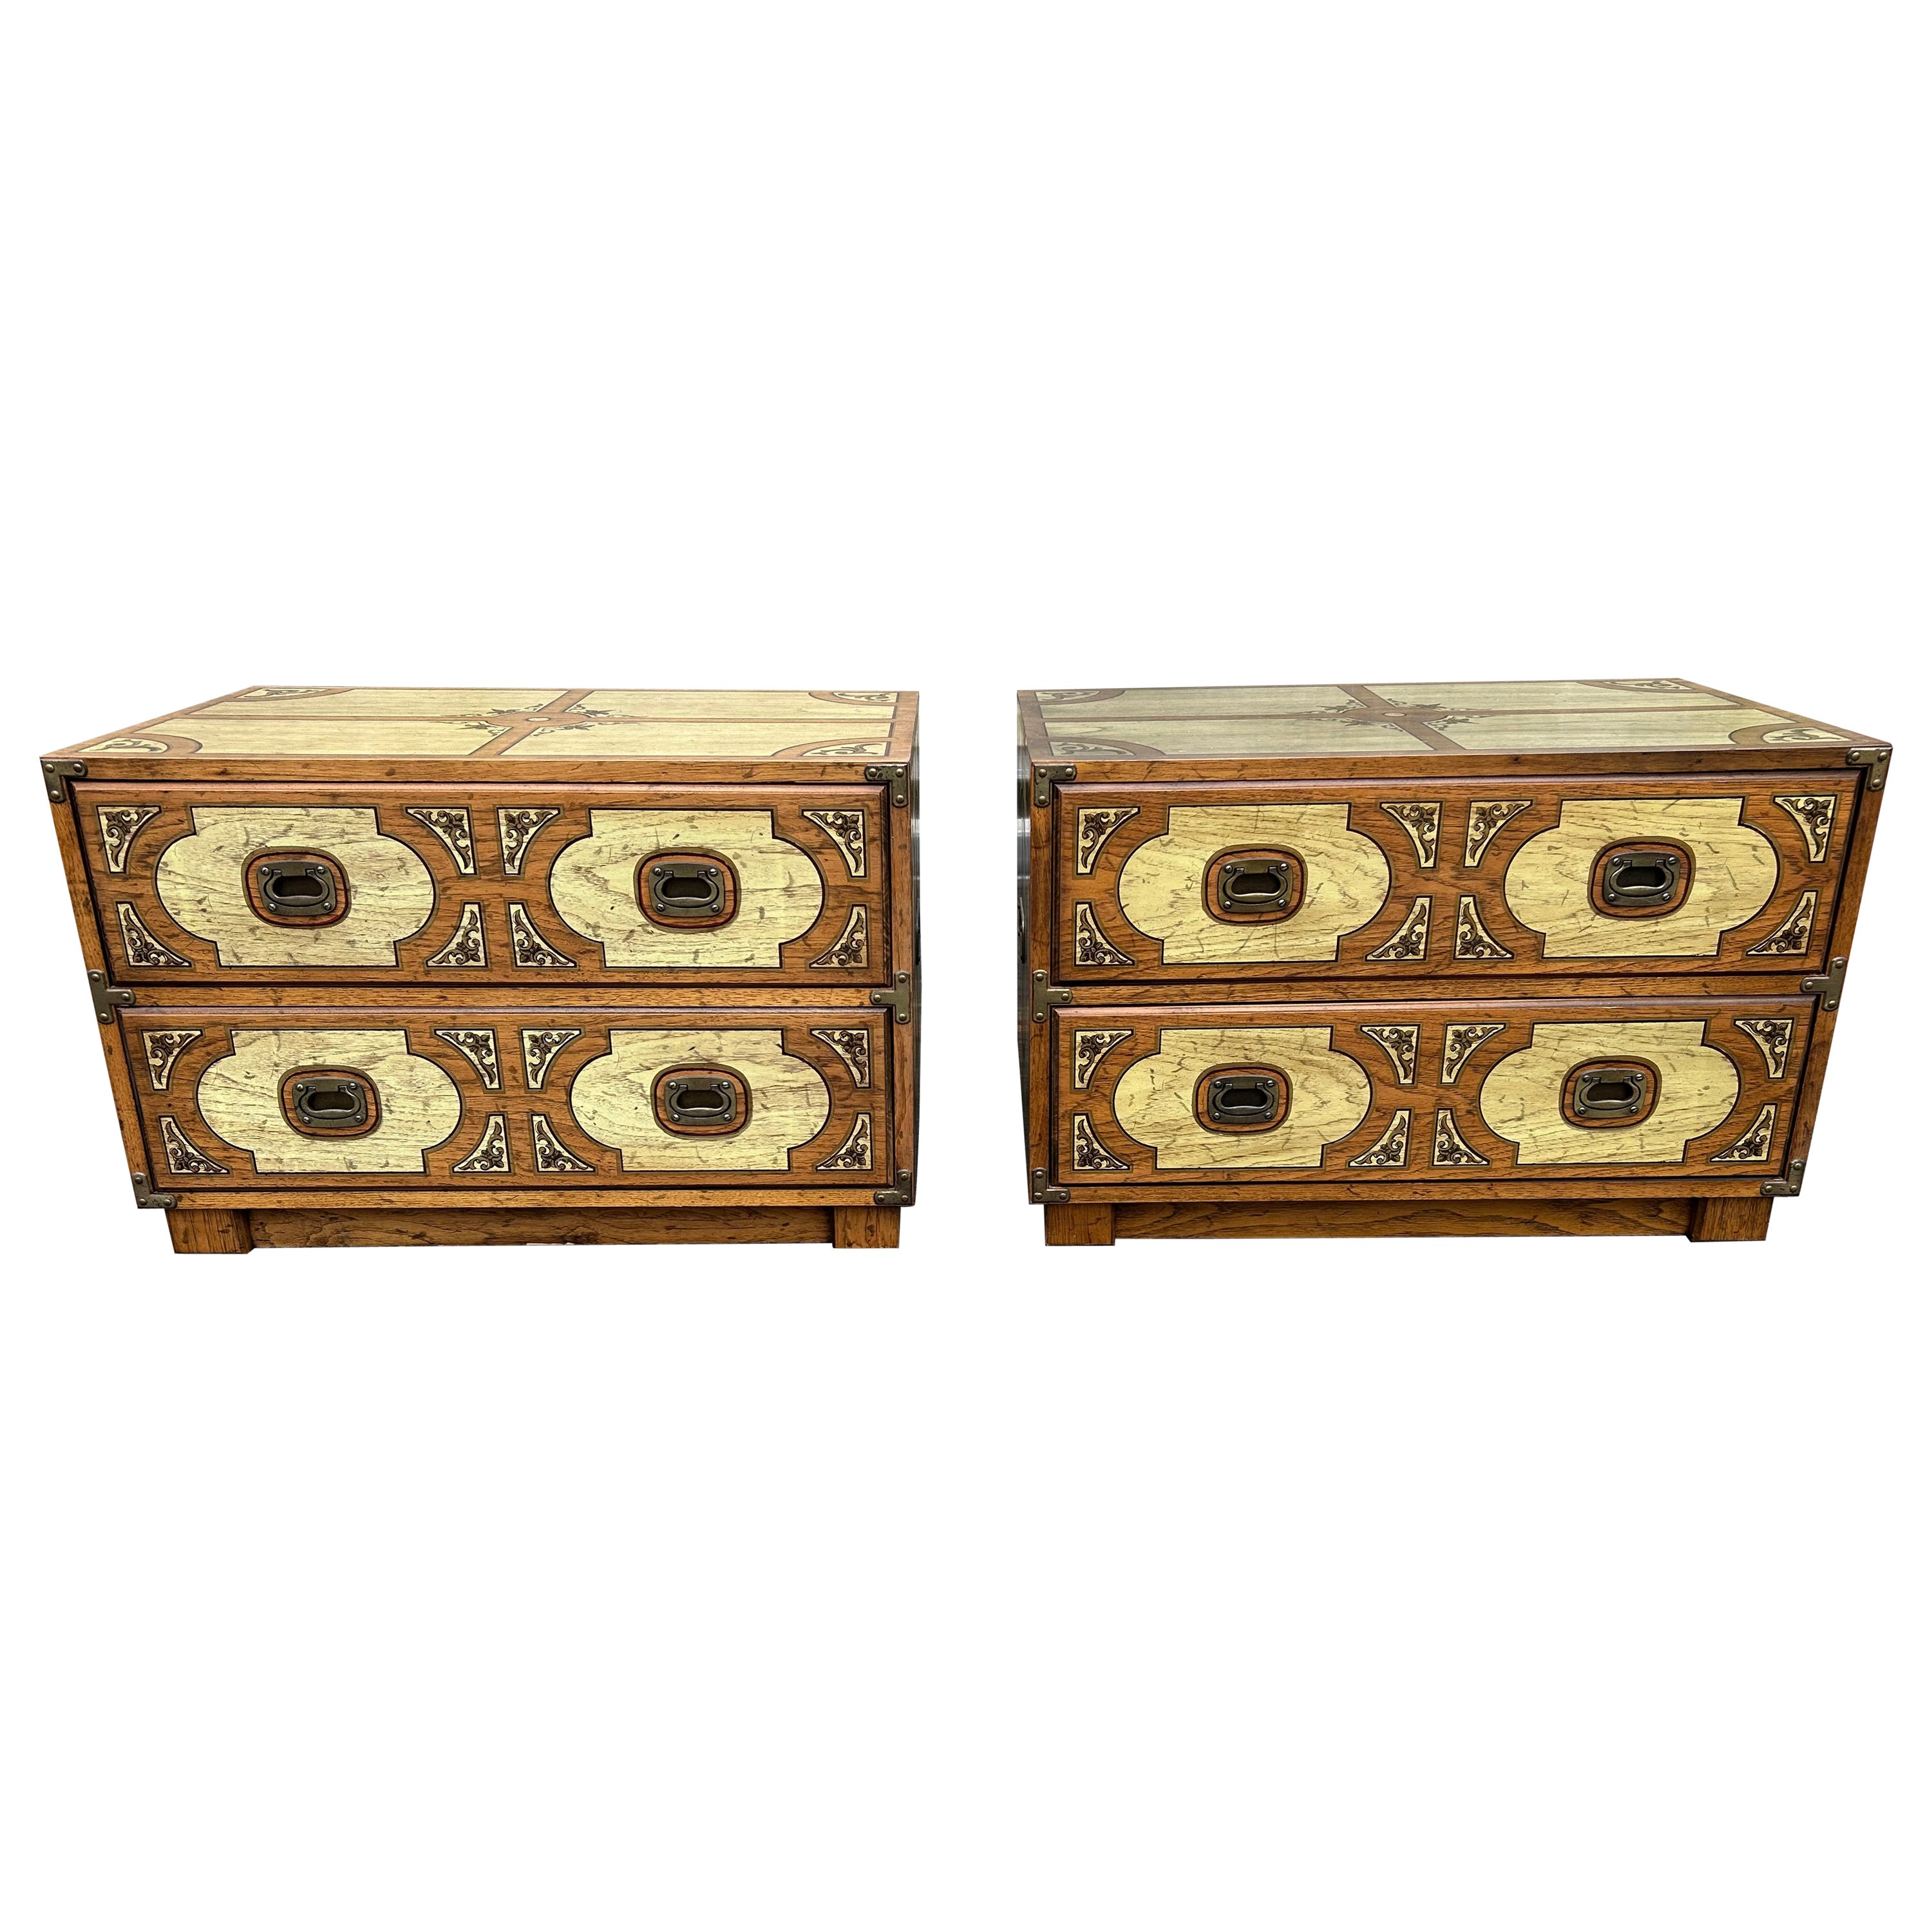 Fabulous Pair Drexel Campaign Chest Oxford Square Mid-Century Modern For Sale